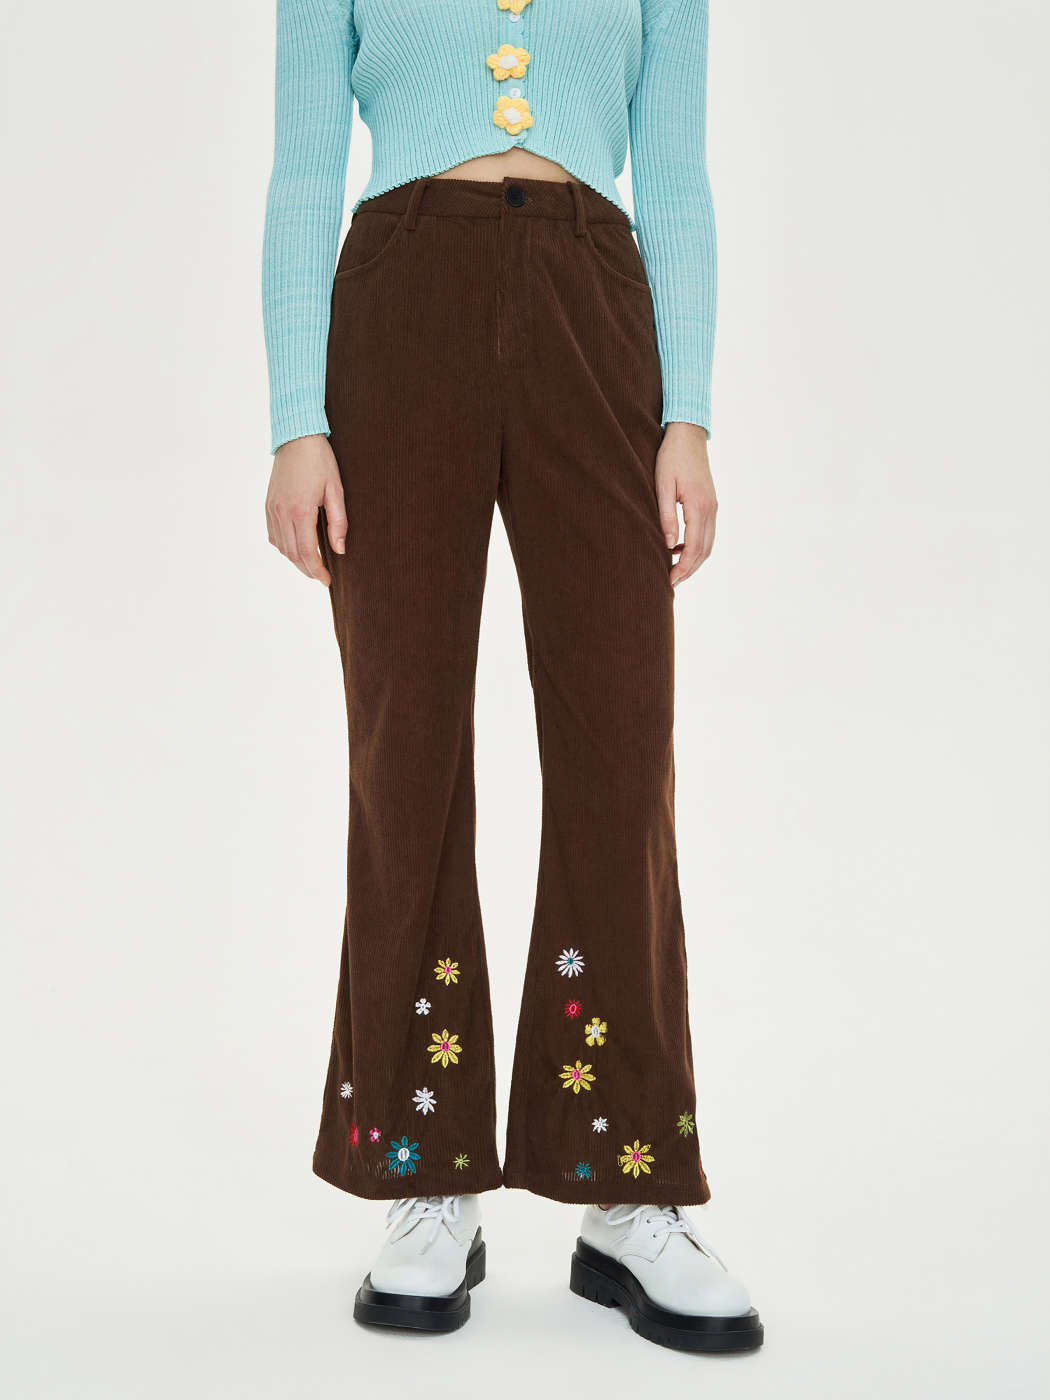 Flower Power Brown Suede Flare Pants - Cider